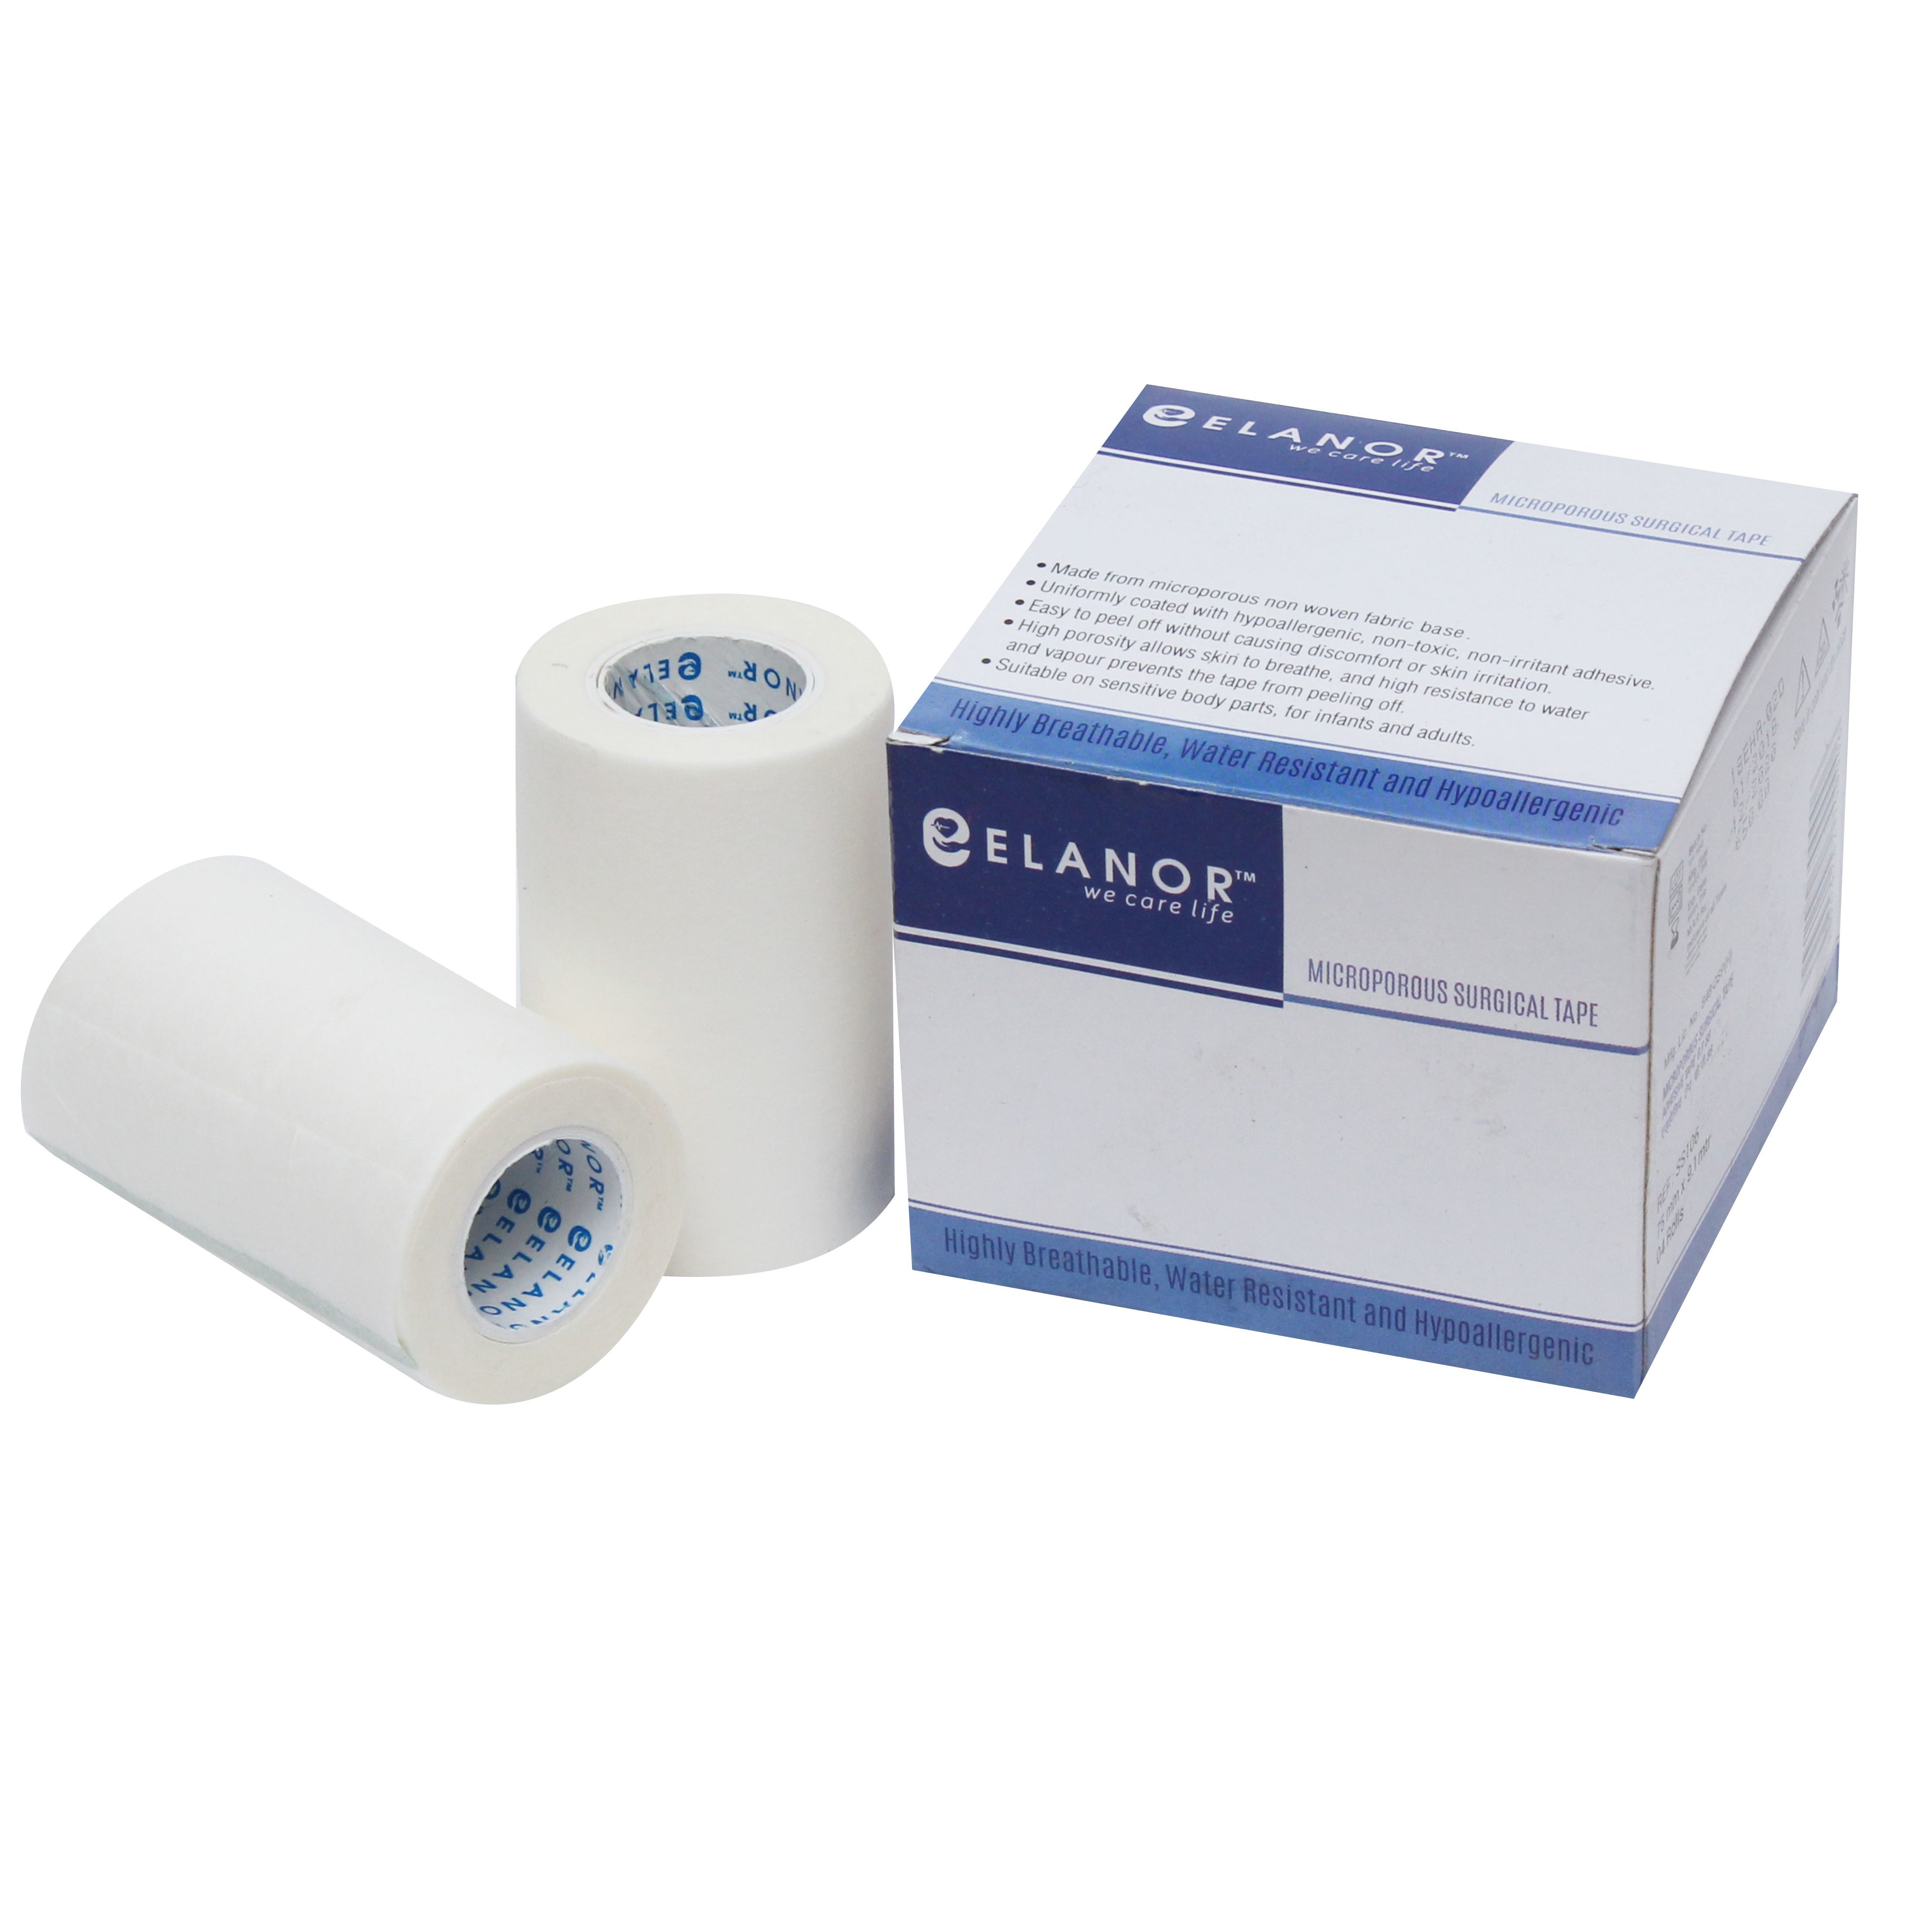 Micorporous Surgical Paper Tape